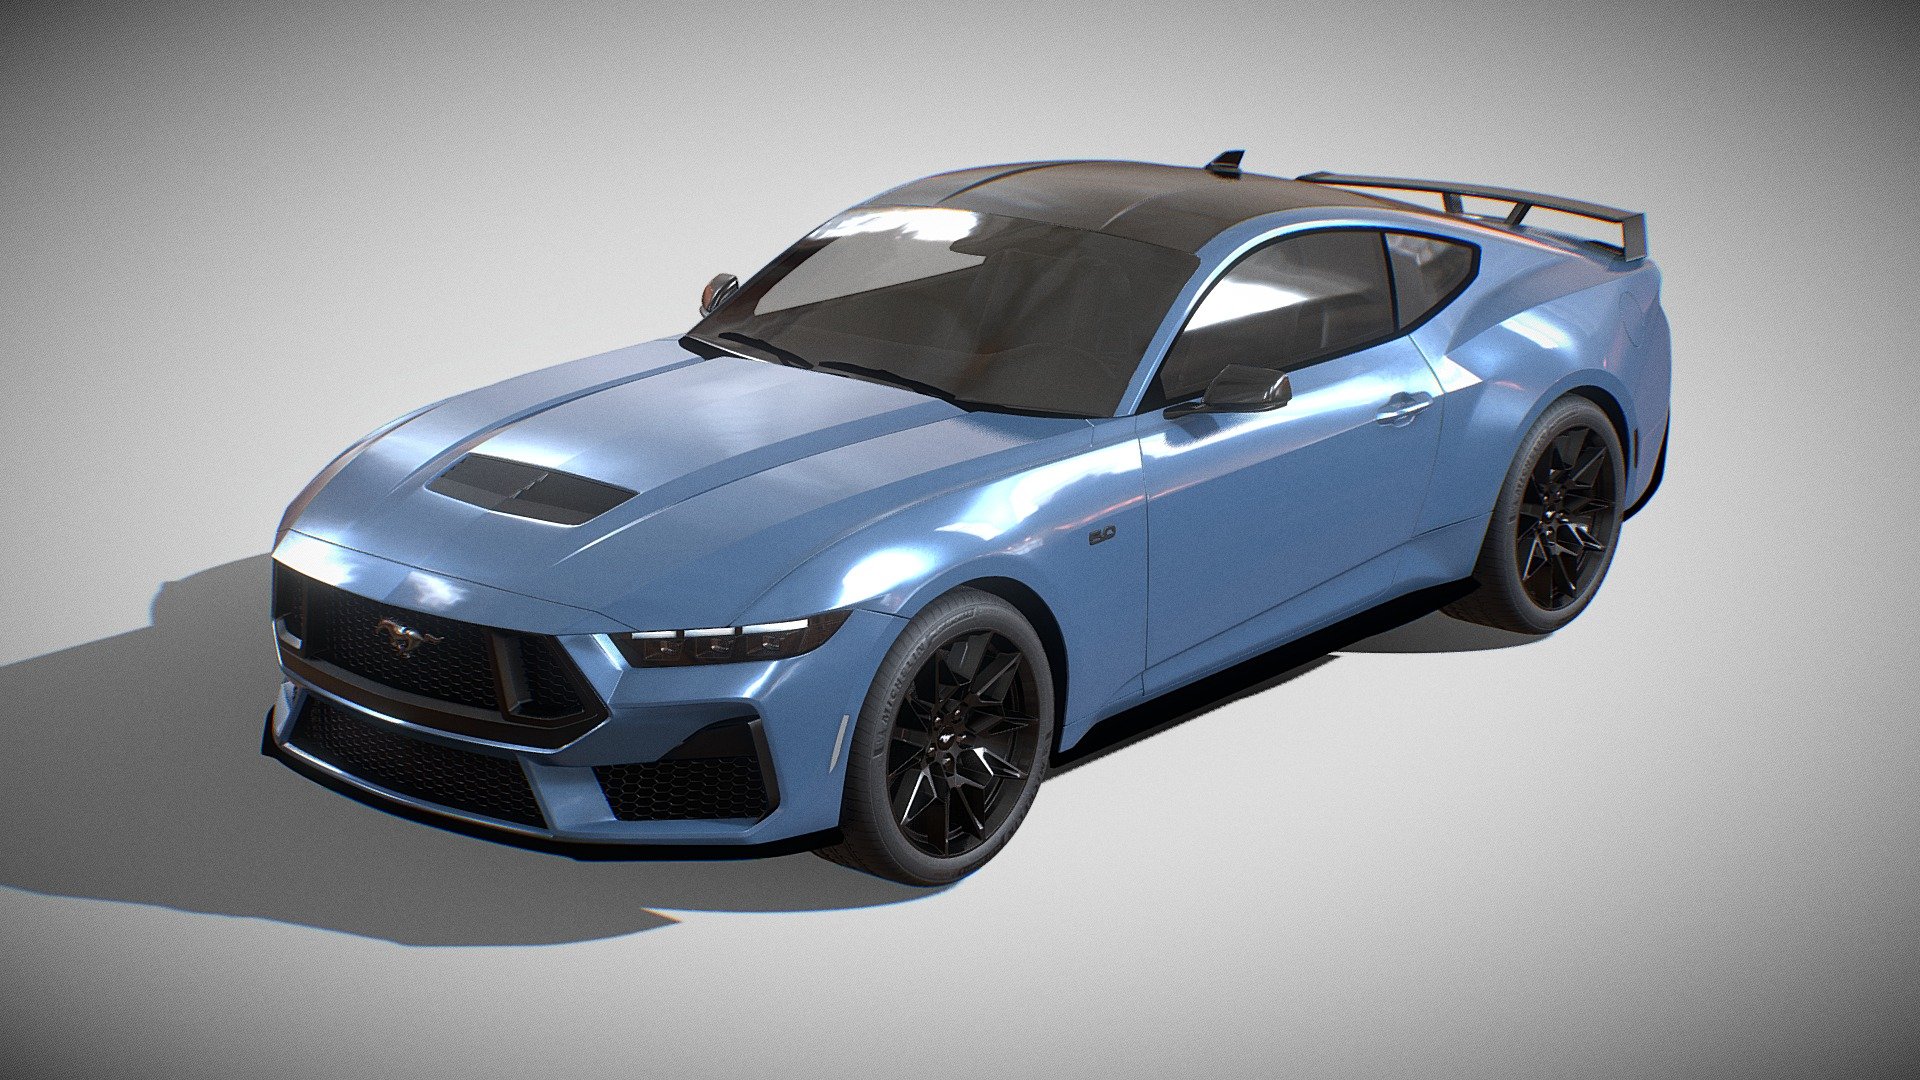 A high quality model of Ford Mustang 2024 GT Game ready VR/AR Compatible.

Every object has material's name, you can easily change or apply materials.

IF THERE IS ANY ISSUE REGARDING ANYTHING JUST MESSAGE ME

Low Poly can be used in VR,Games Etc

Specs: All the textures are in jpg format and UVW wrapped.
Model is fully textured with based on real object. All textures and materials are included and mapped in every format. Model does not include any backgrounds or scenes used in preview images. Renders made with Blender in Cycles.

This model is high quality, photo realalistic. The model has a fully textured, detailed design that allows for close-up renders, and was originally modeled and Textured in Blender. Fidelity is optimal up to a 4k render - Ford Mustang 2024 GT 2024 - Buy Royalty Free 3D model by S3DCreation 3d model